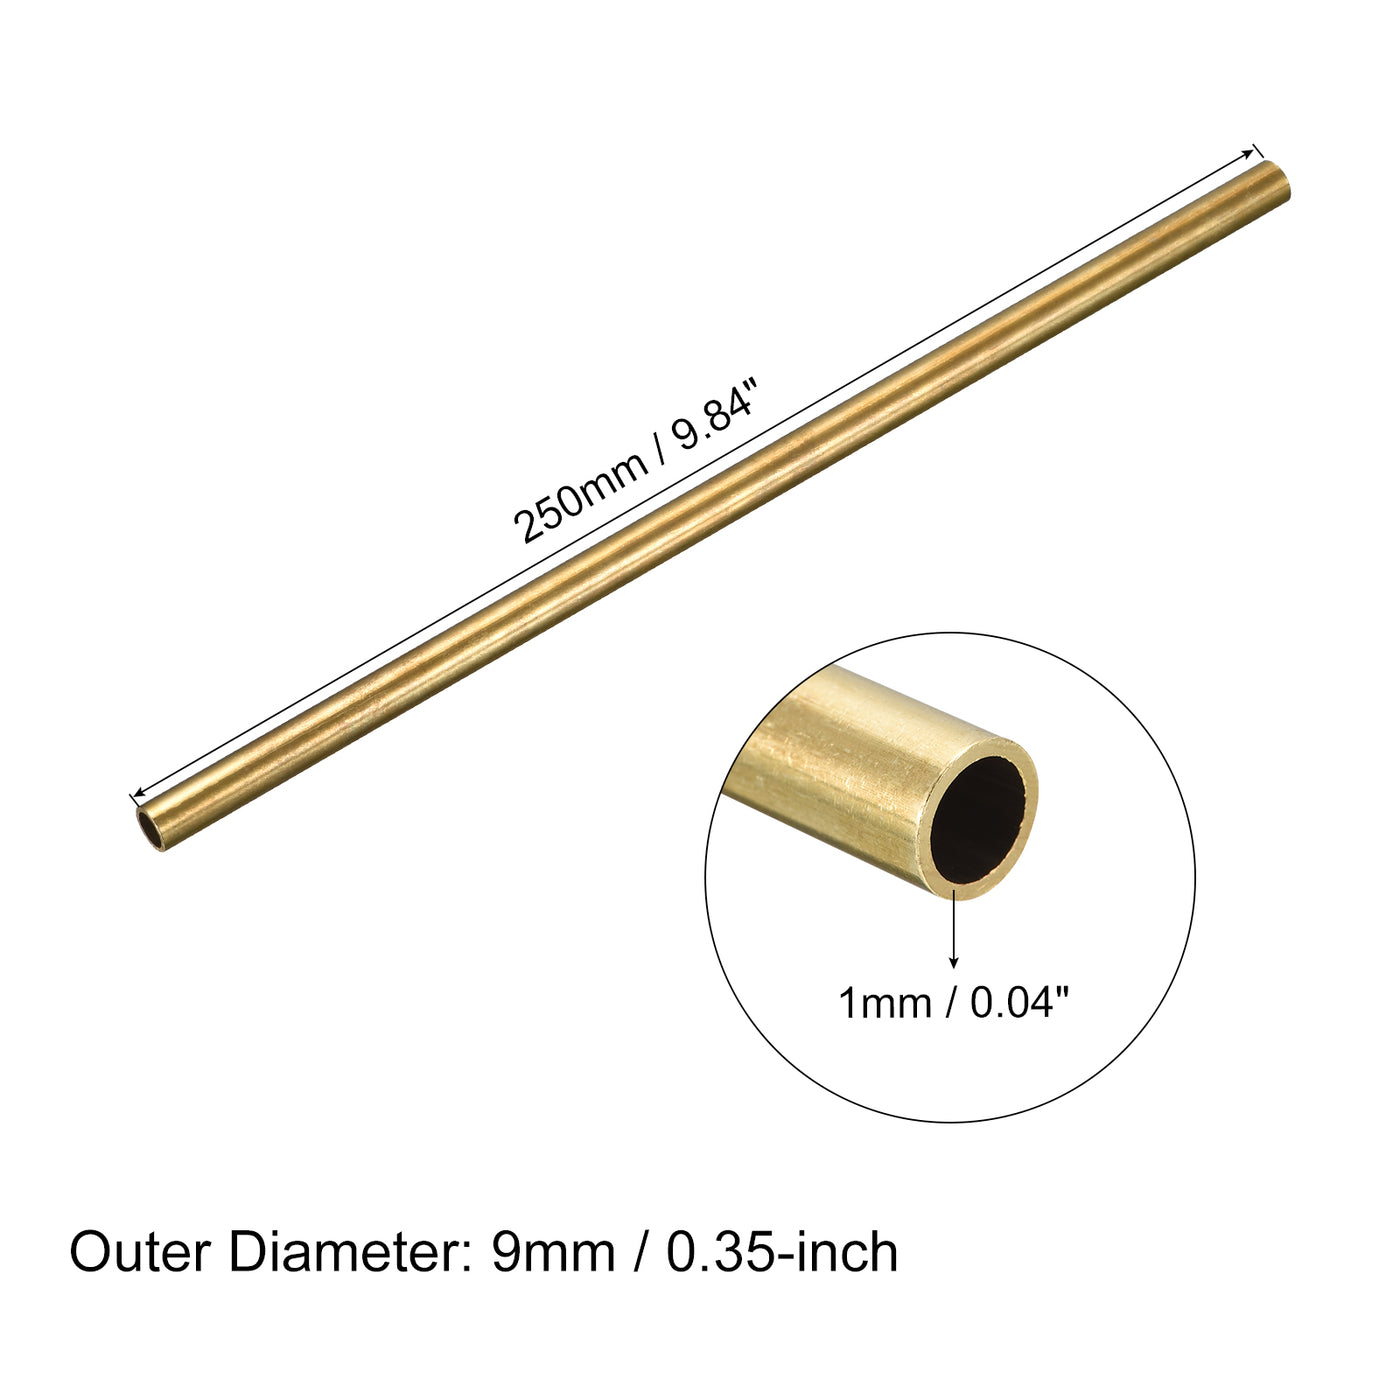 uxcell Uxcell Brass Round Tube 9mm OD 1mm Wall Thickness 250mm Length Pipe Tubing 2 Pcs